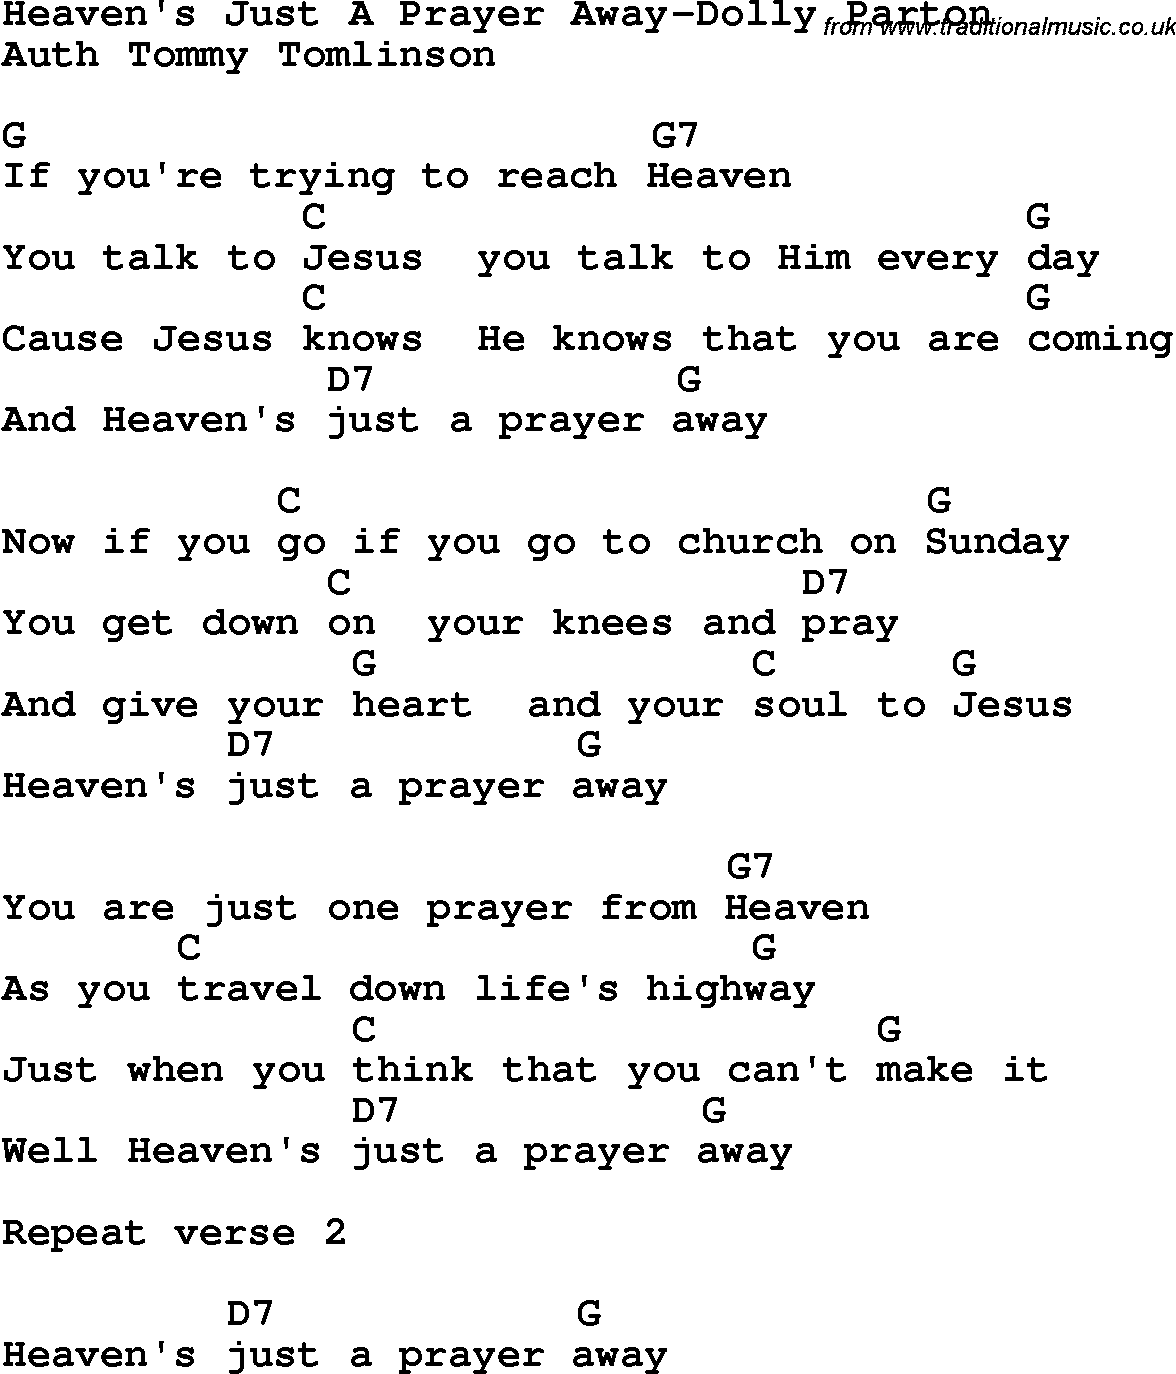 Country, Southern and Bluegrass Gospel Song Heaven's Just A Prayer Away-Dolly Parton lyrics and chords